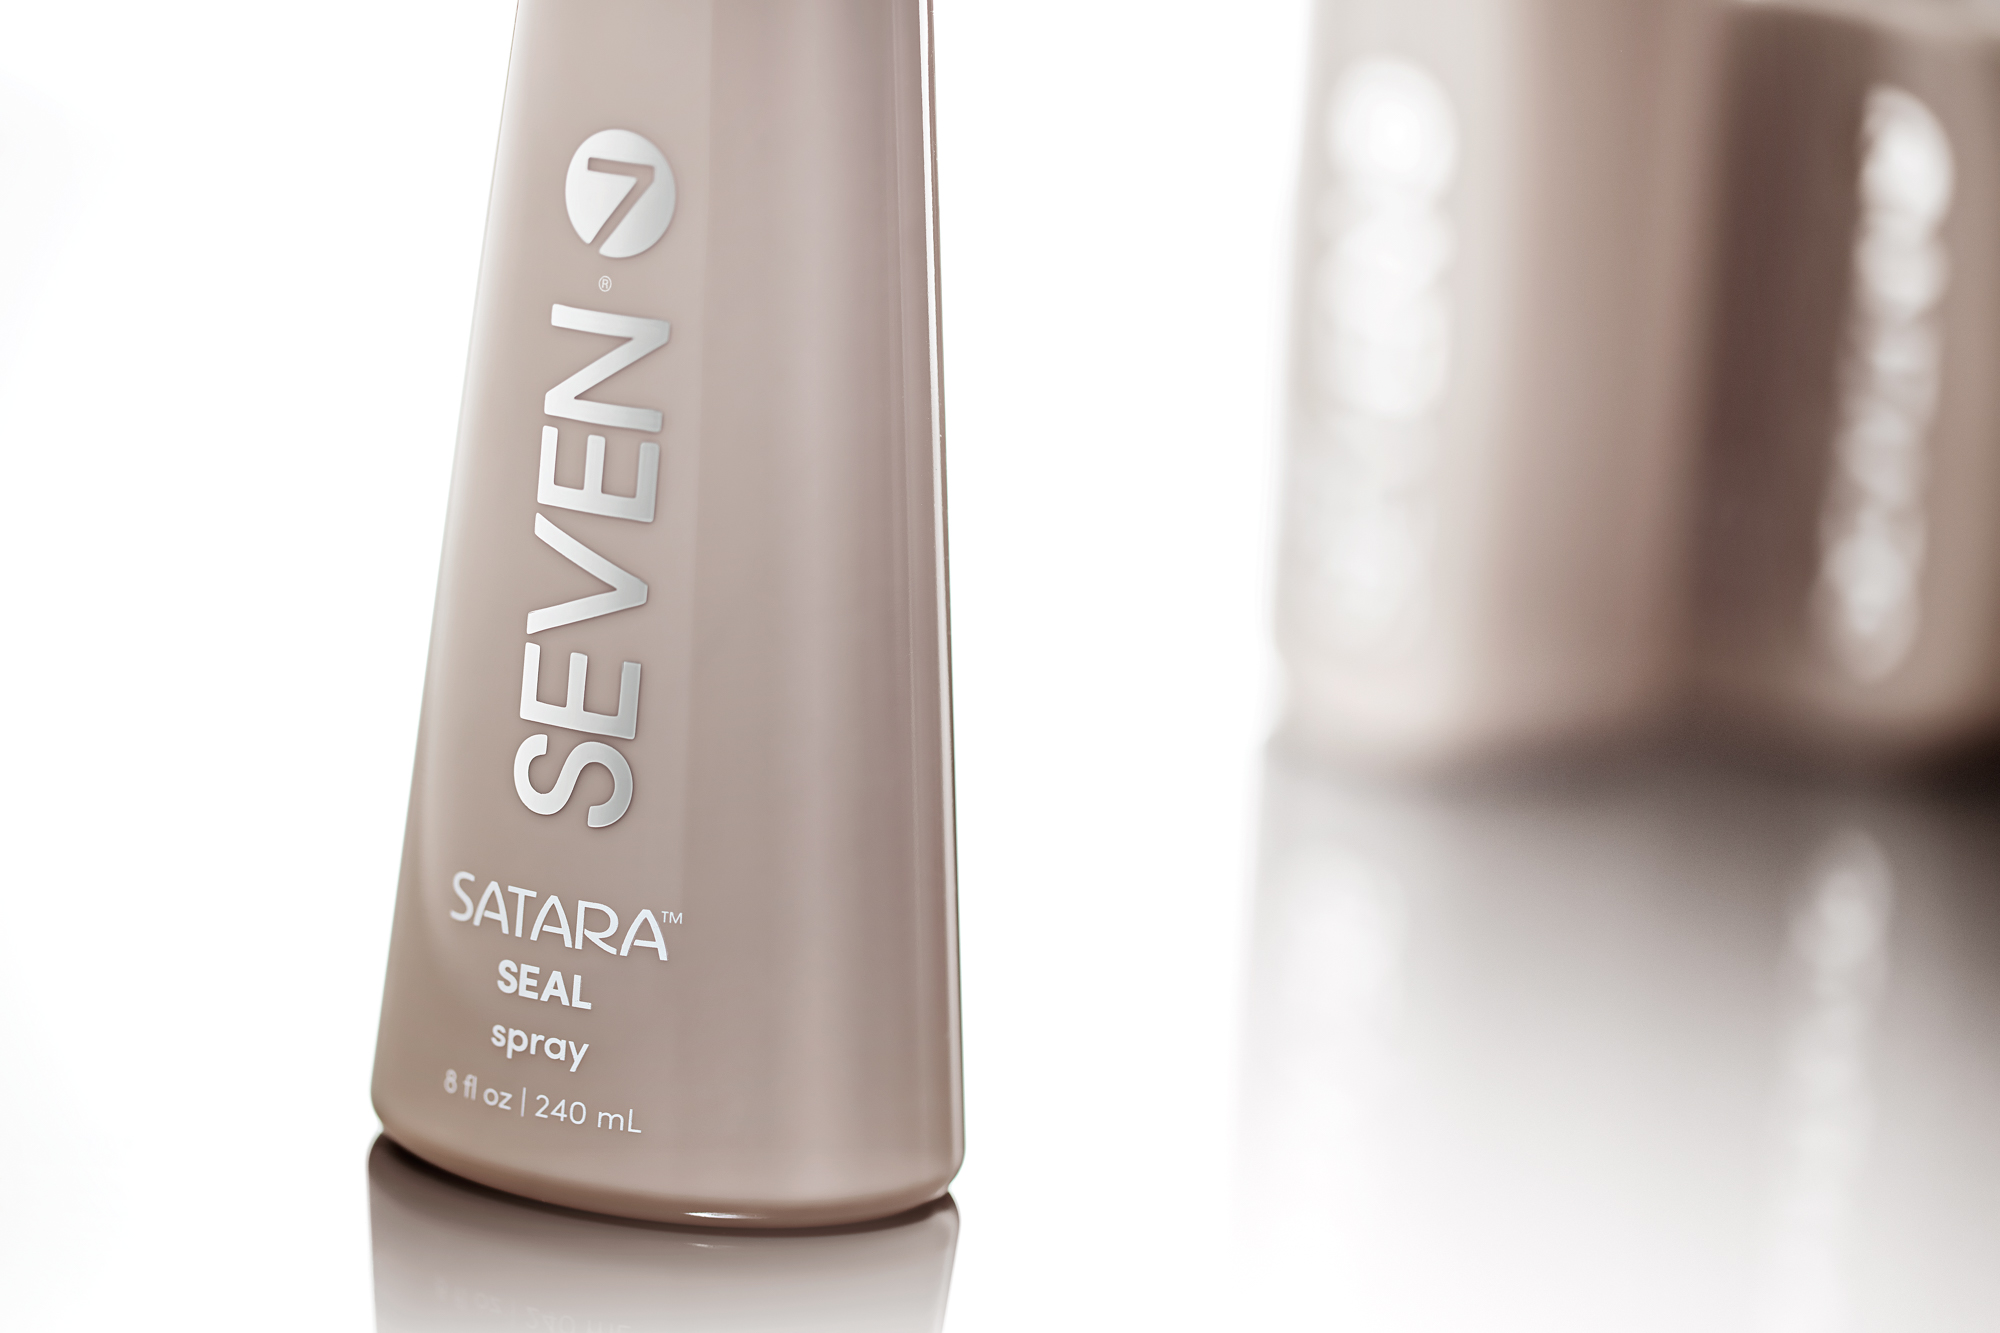 SATARA® SEAL is an anti-frizz spray that is a perfect foundation for styling products.